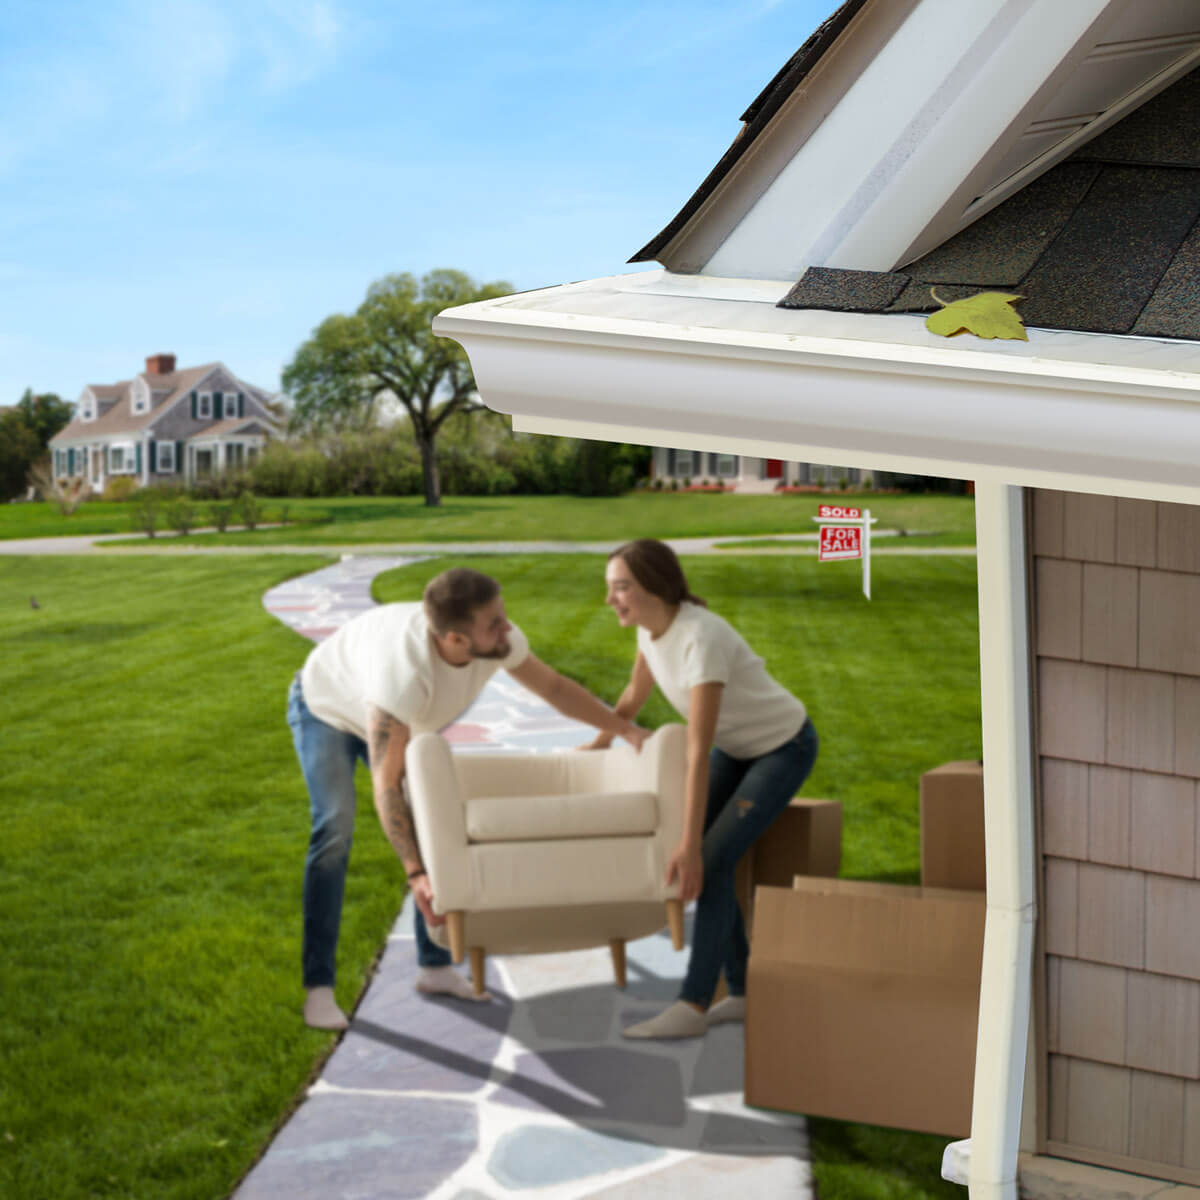 A couple moves an armchair into their recently purchased home under LeafFilter-protected gutters